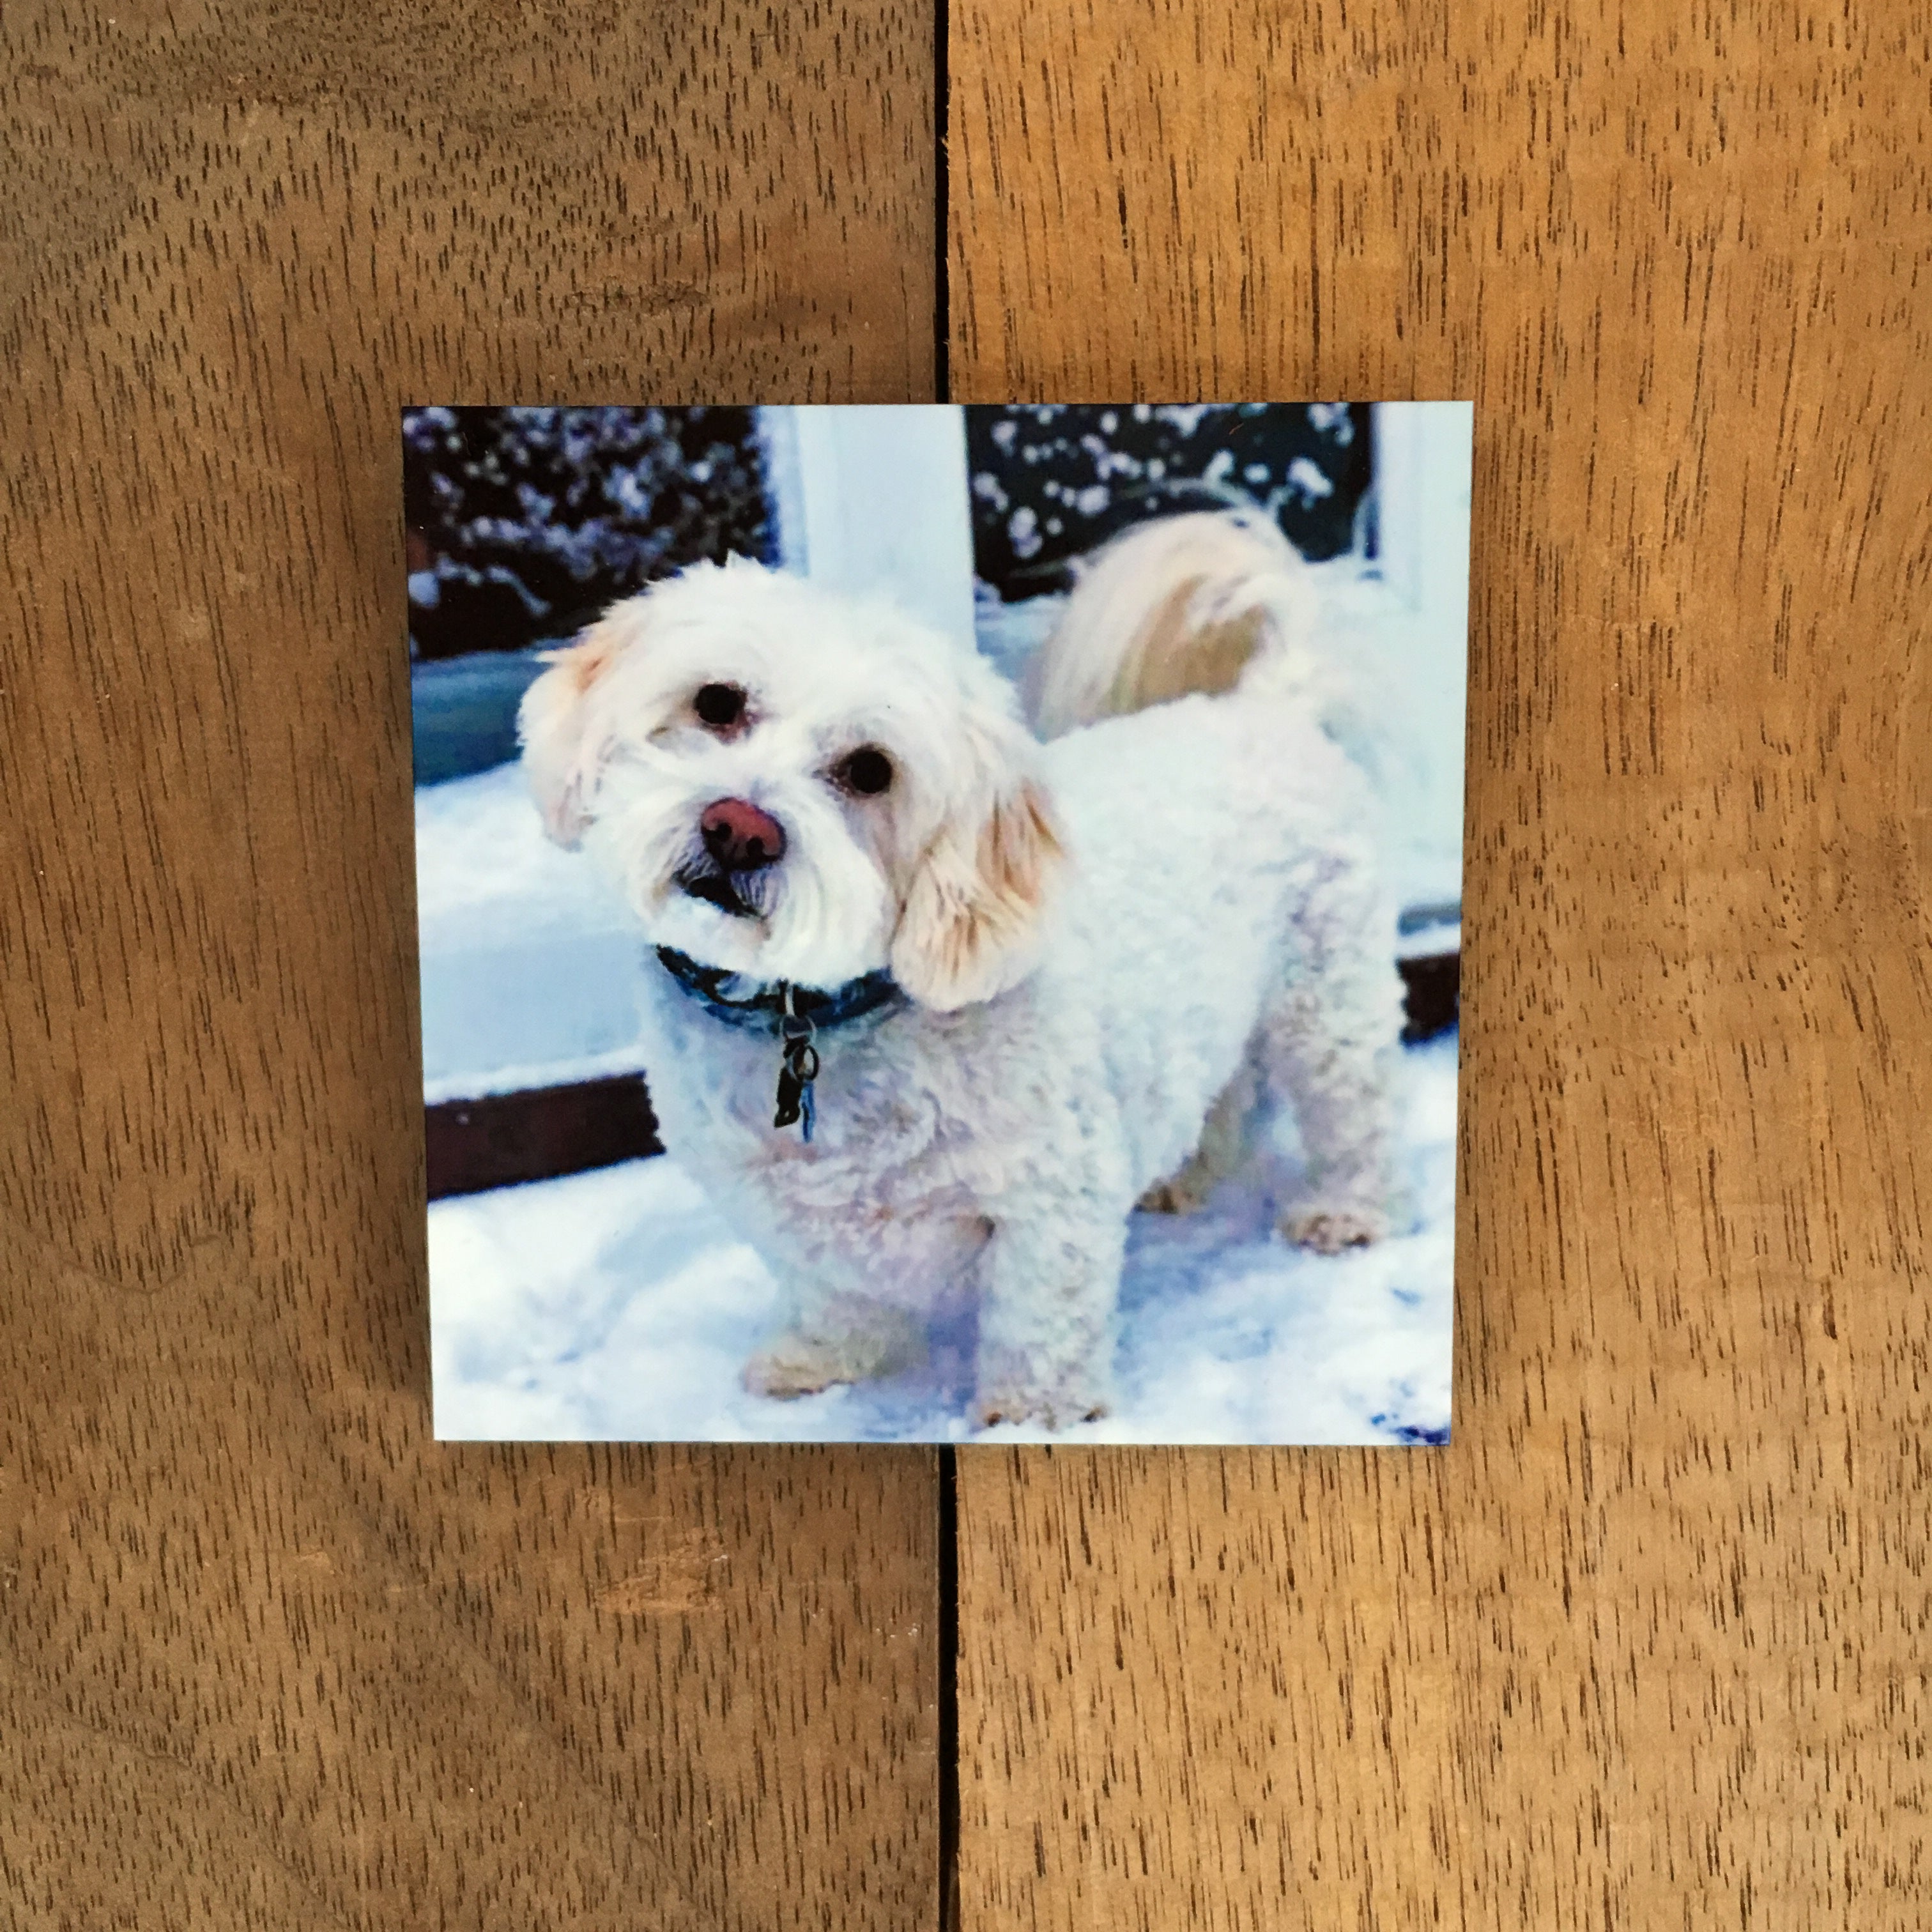 Cheap Photo Gifts | Personalized Gifts Online | Winkflash